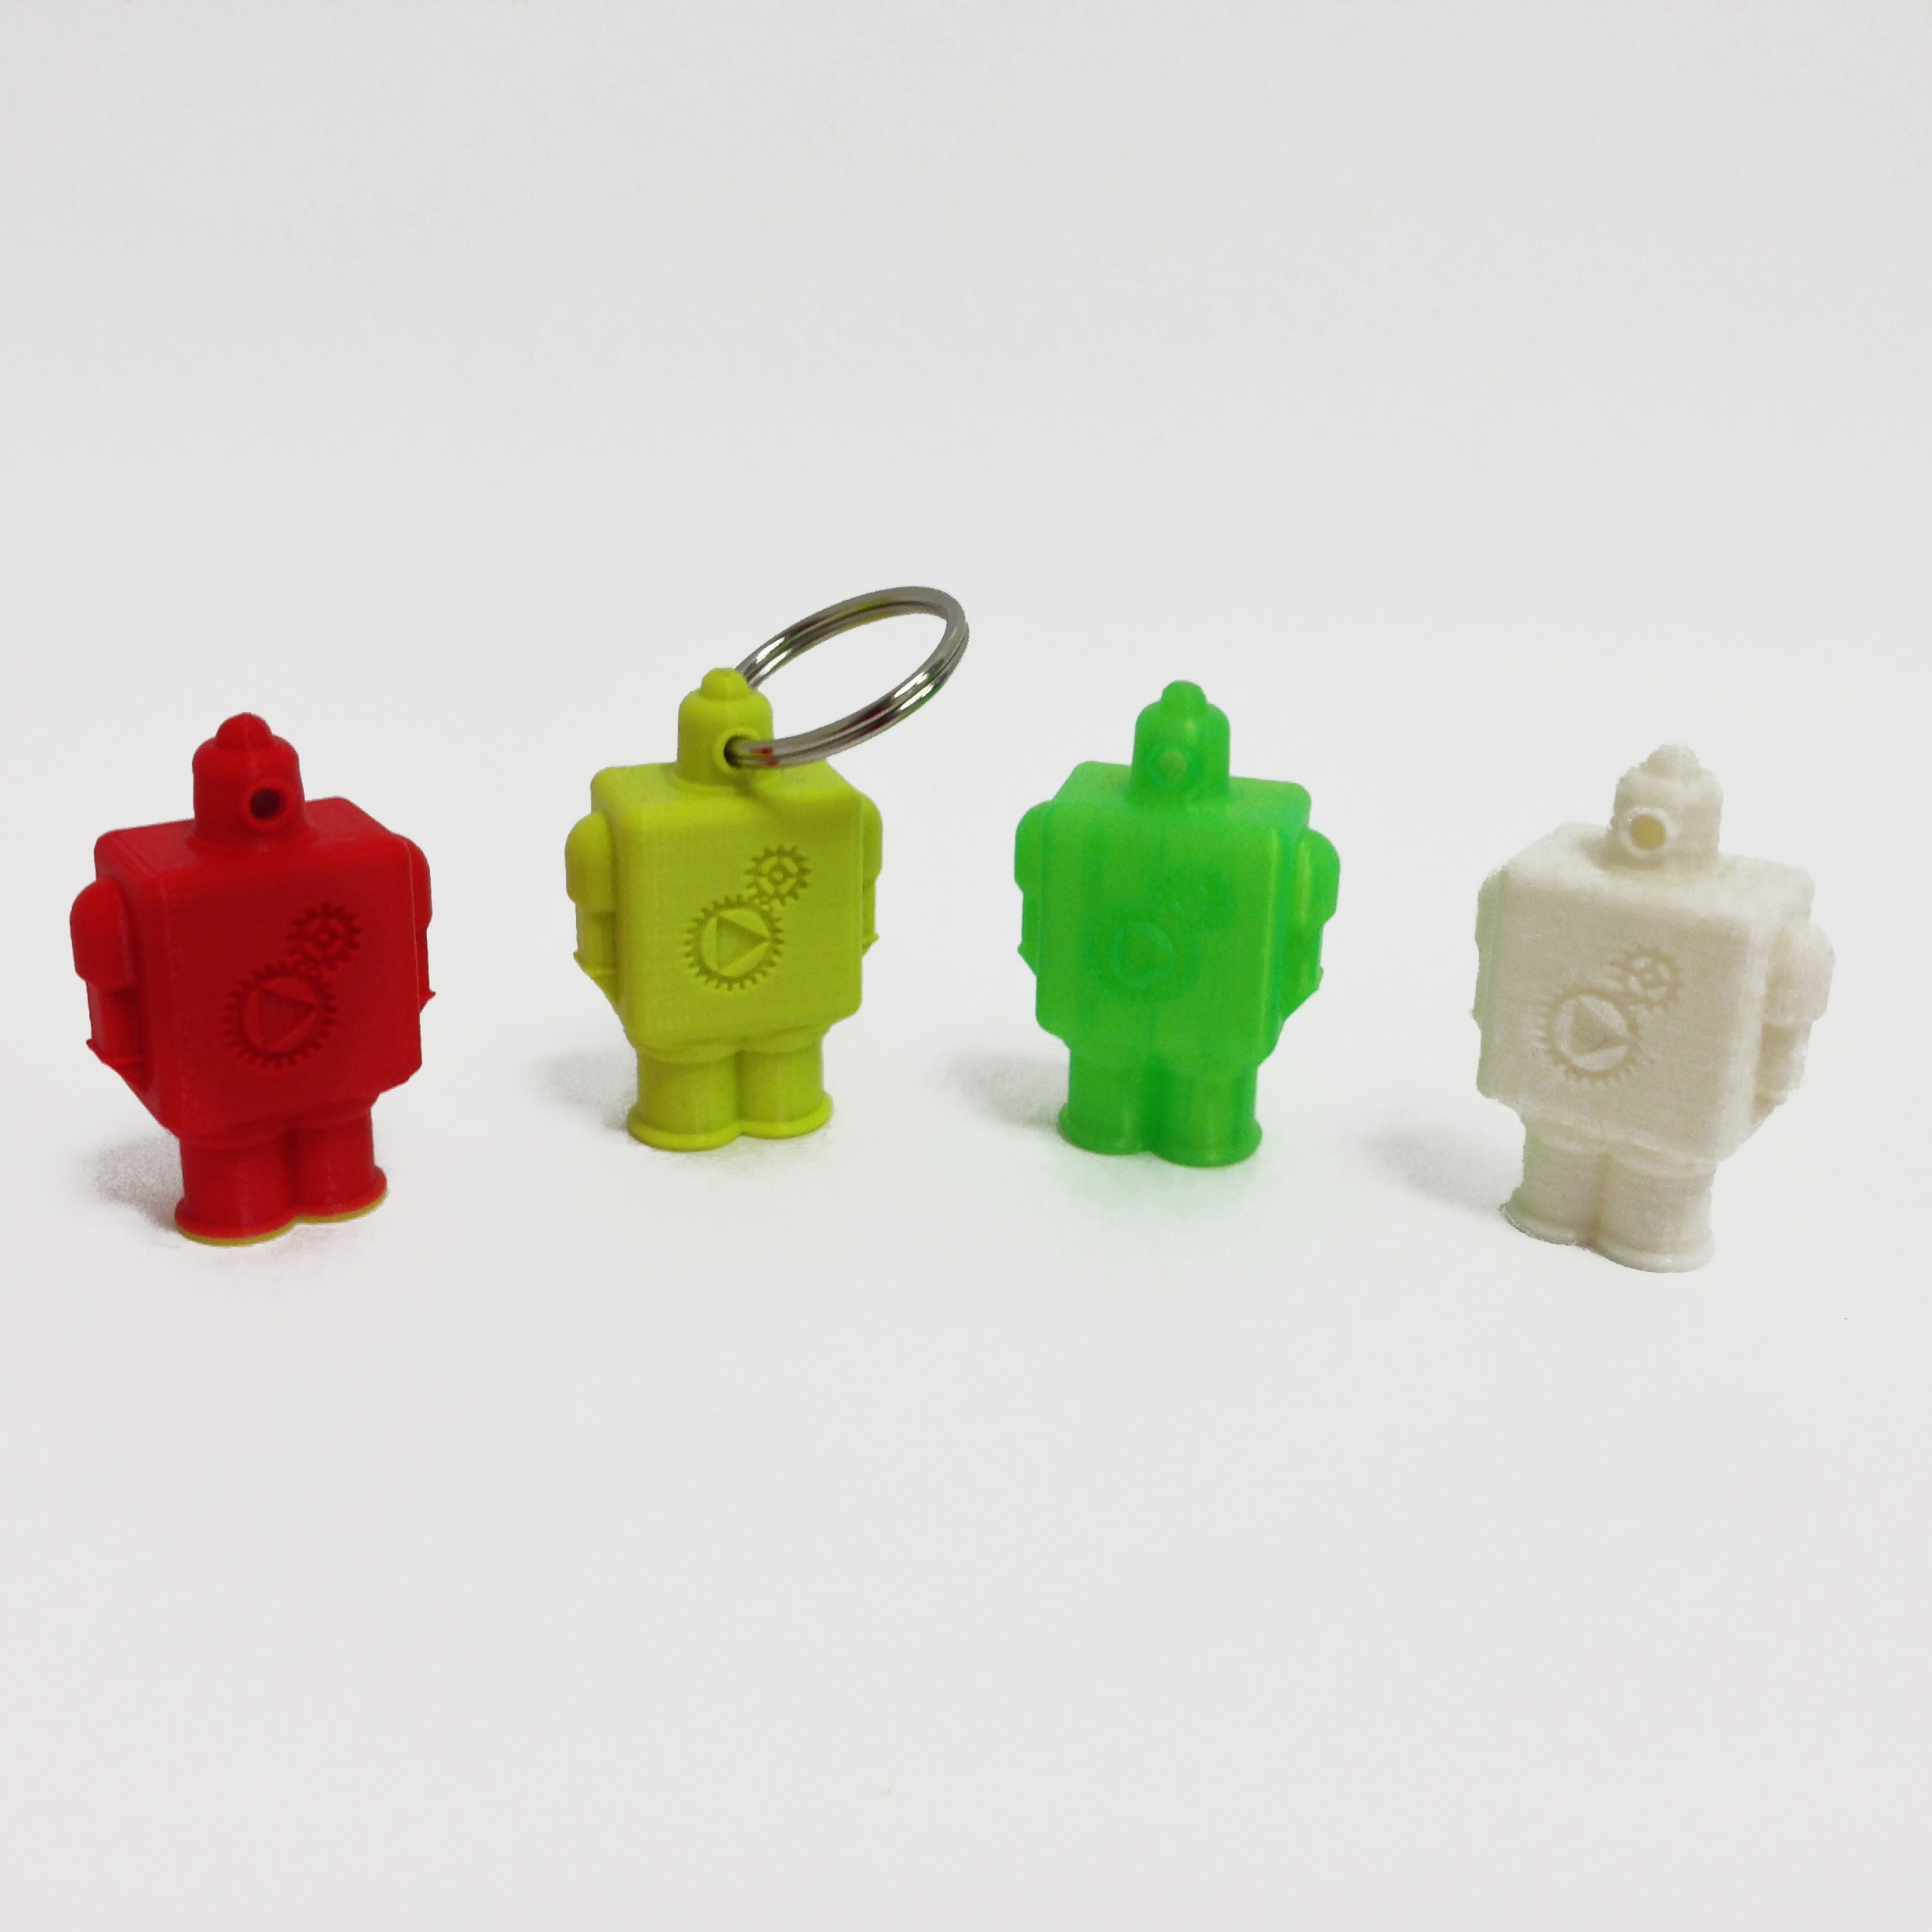 H1M, the keychain robot, our first product on sale